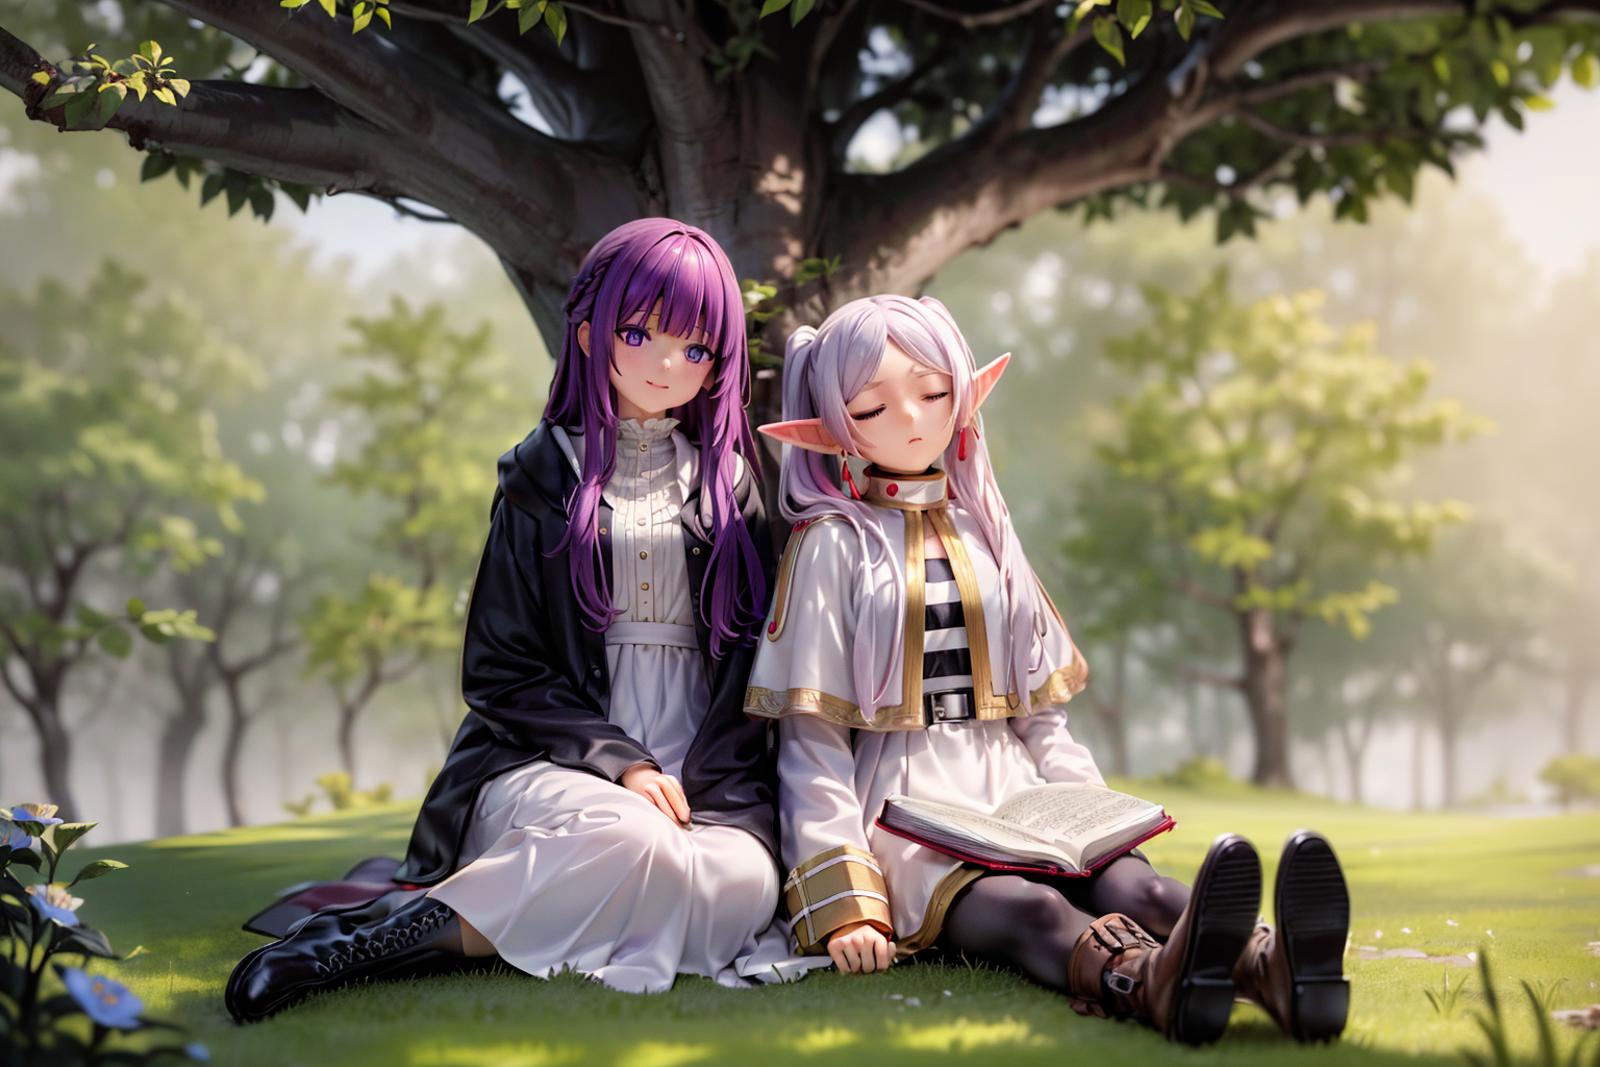 Two female characters sitting on the grass under a tree.